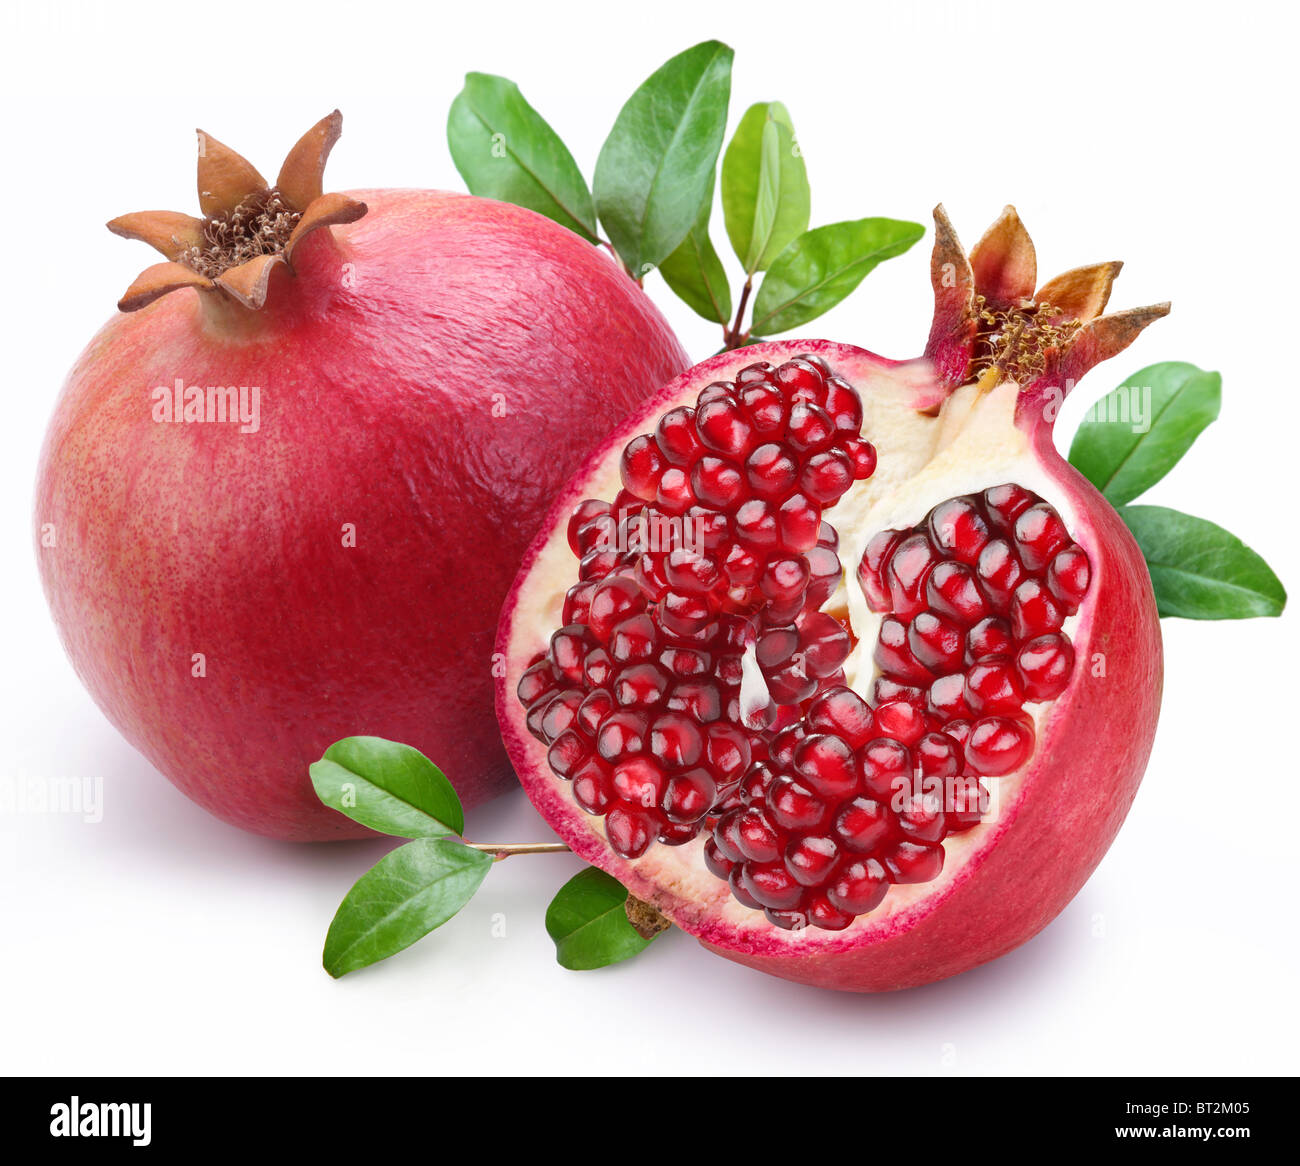 Juicy pomegranate and its half with leaves. Isolated on a white background. Stock Photo